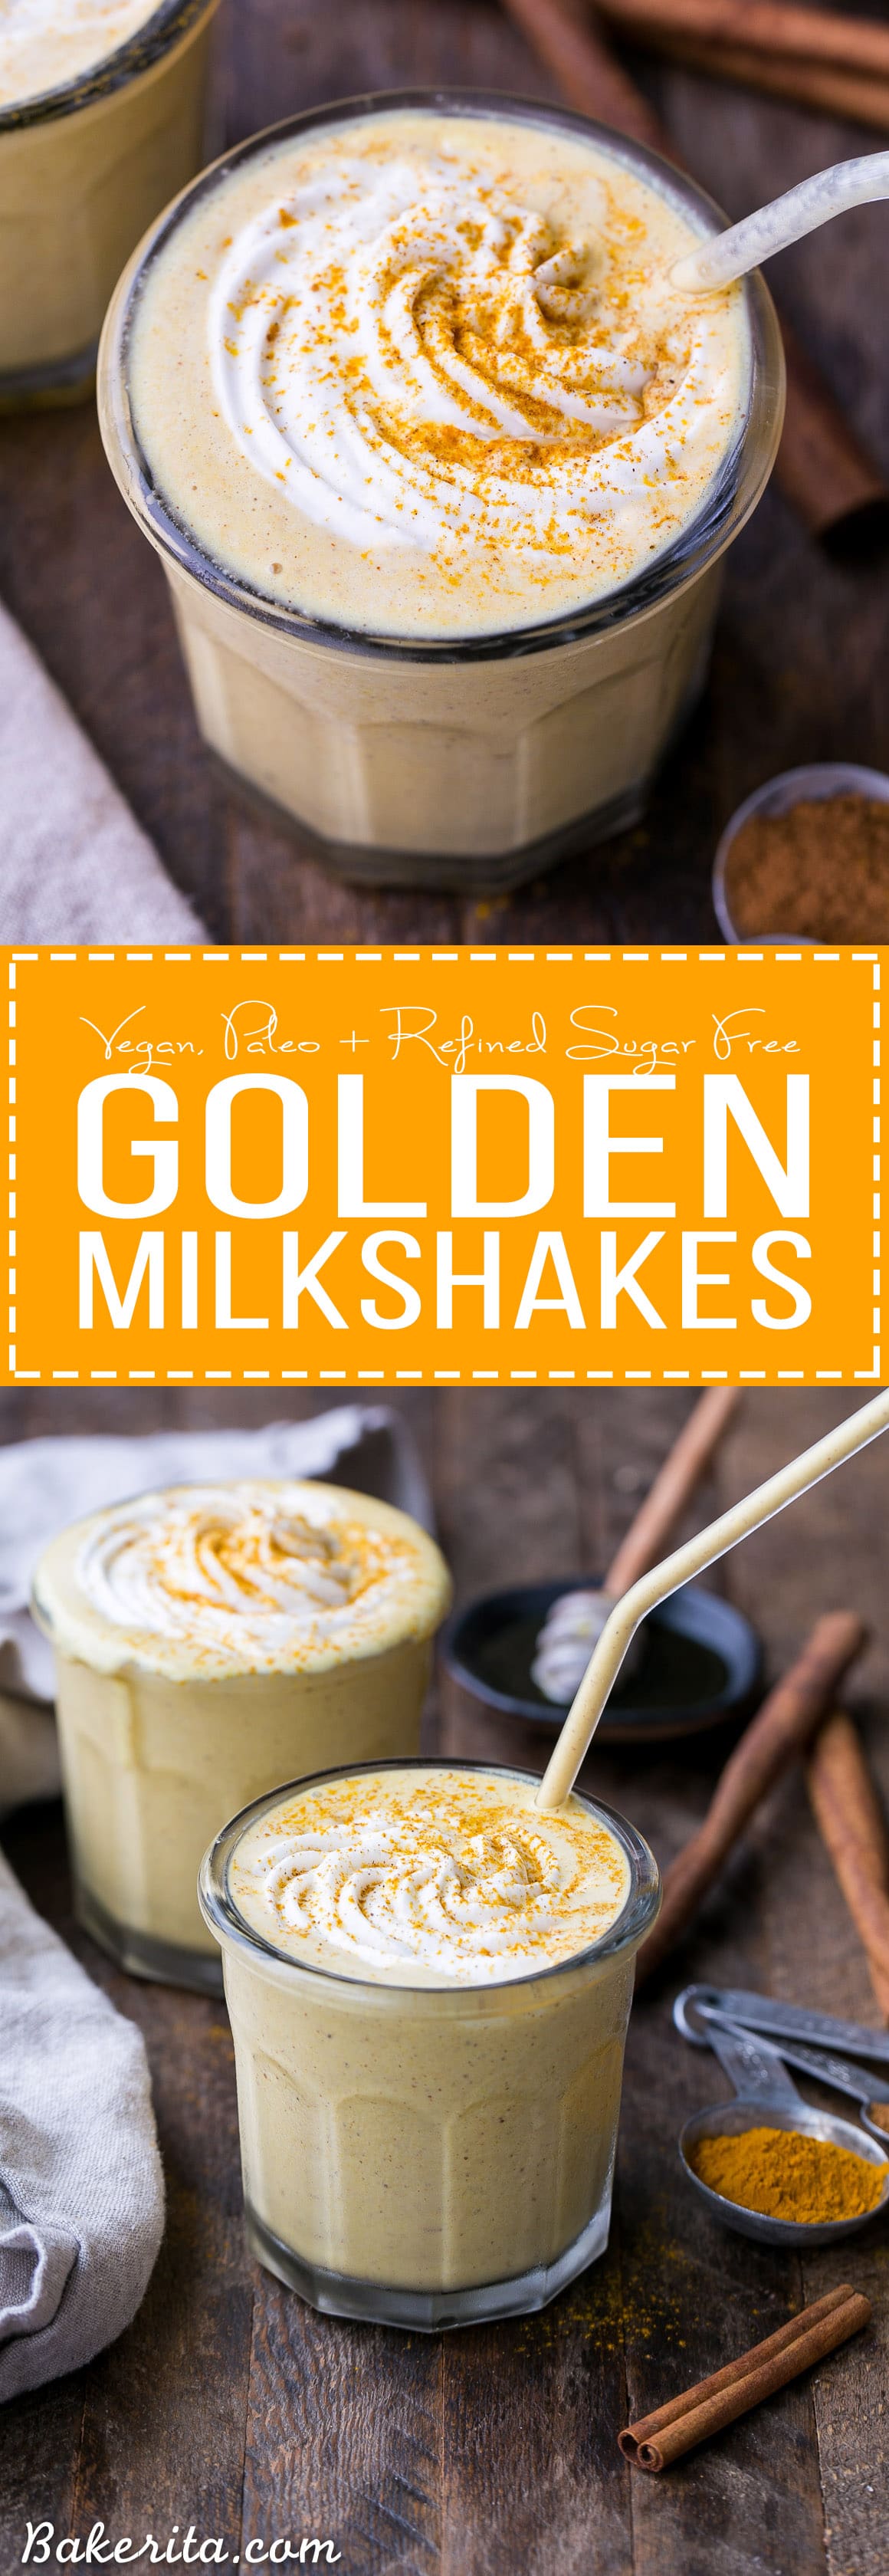 Golden Milkshakes are smooth, creamy, and refreshing, and they're loaded with anti-inflammatory turmeric and other health-boosting spices. This easy drink recipe is one you'll love sipping on hot days!